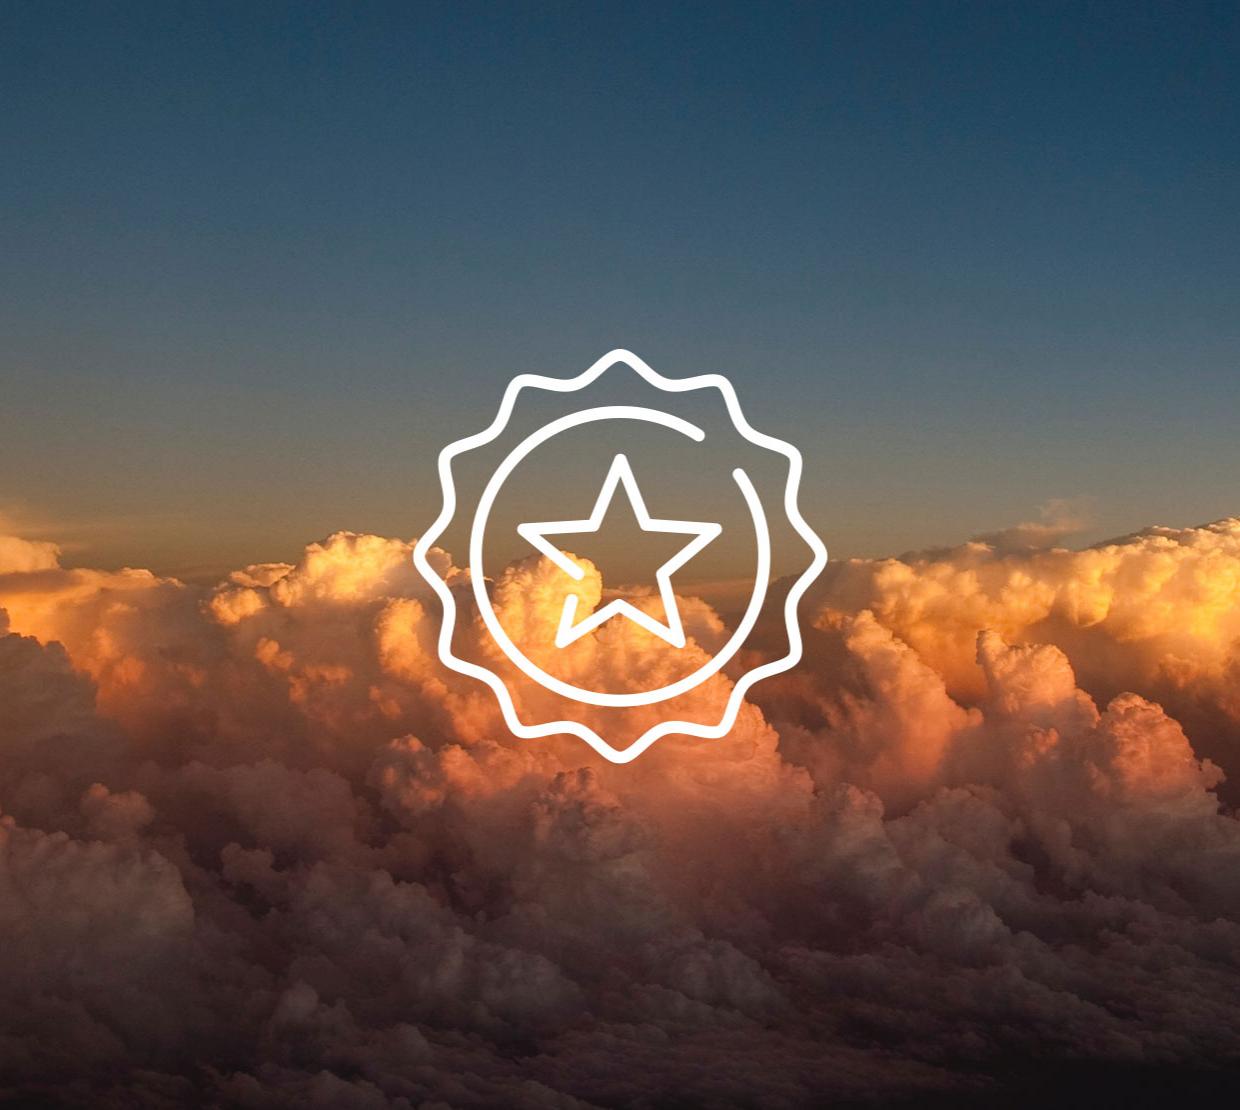 star icon above image of clouds at sunset